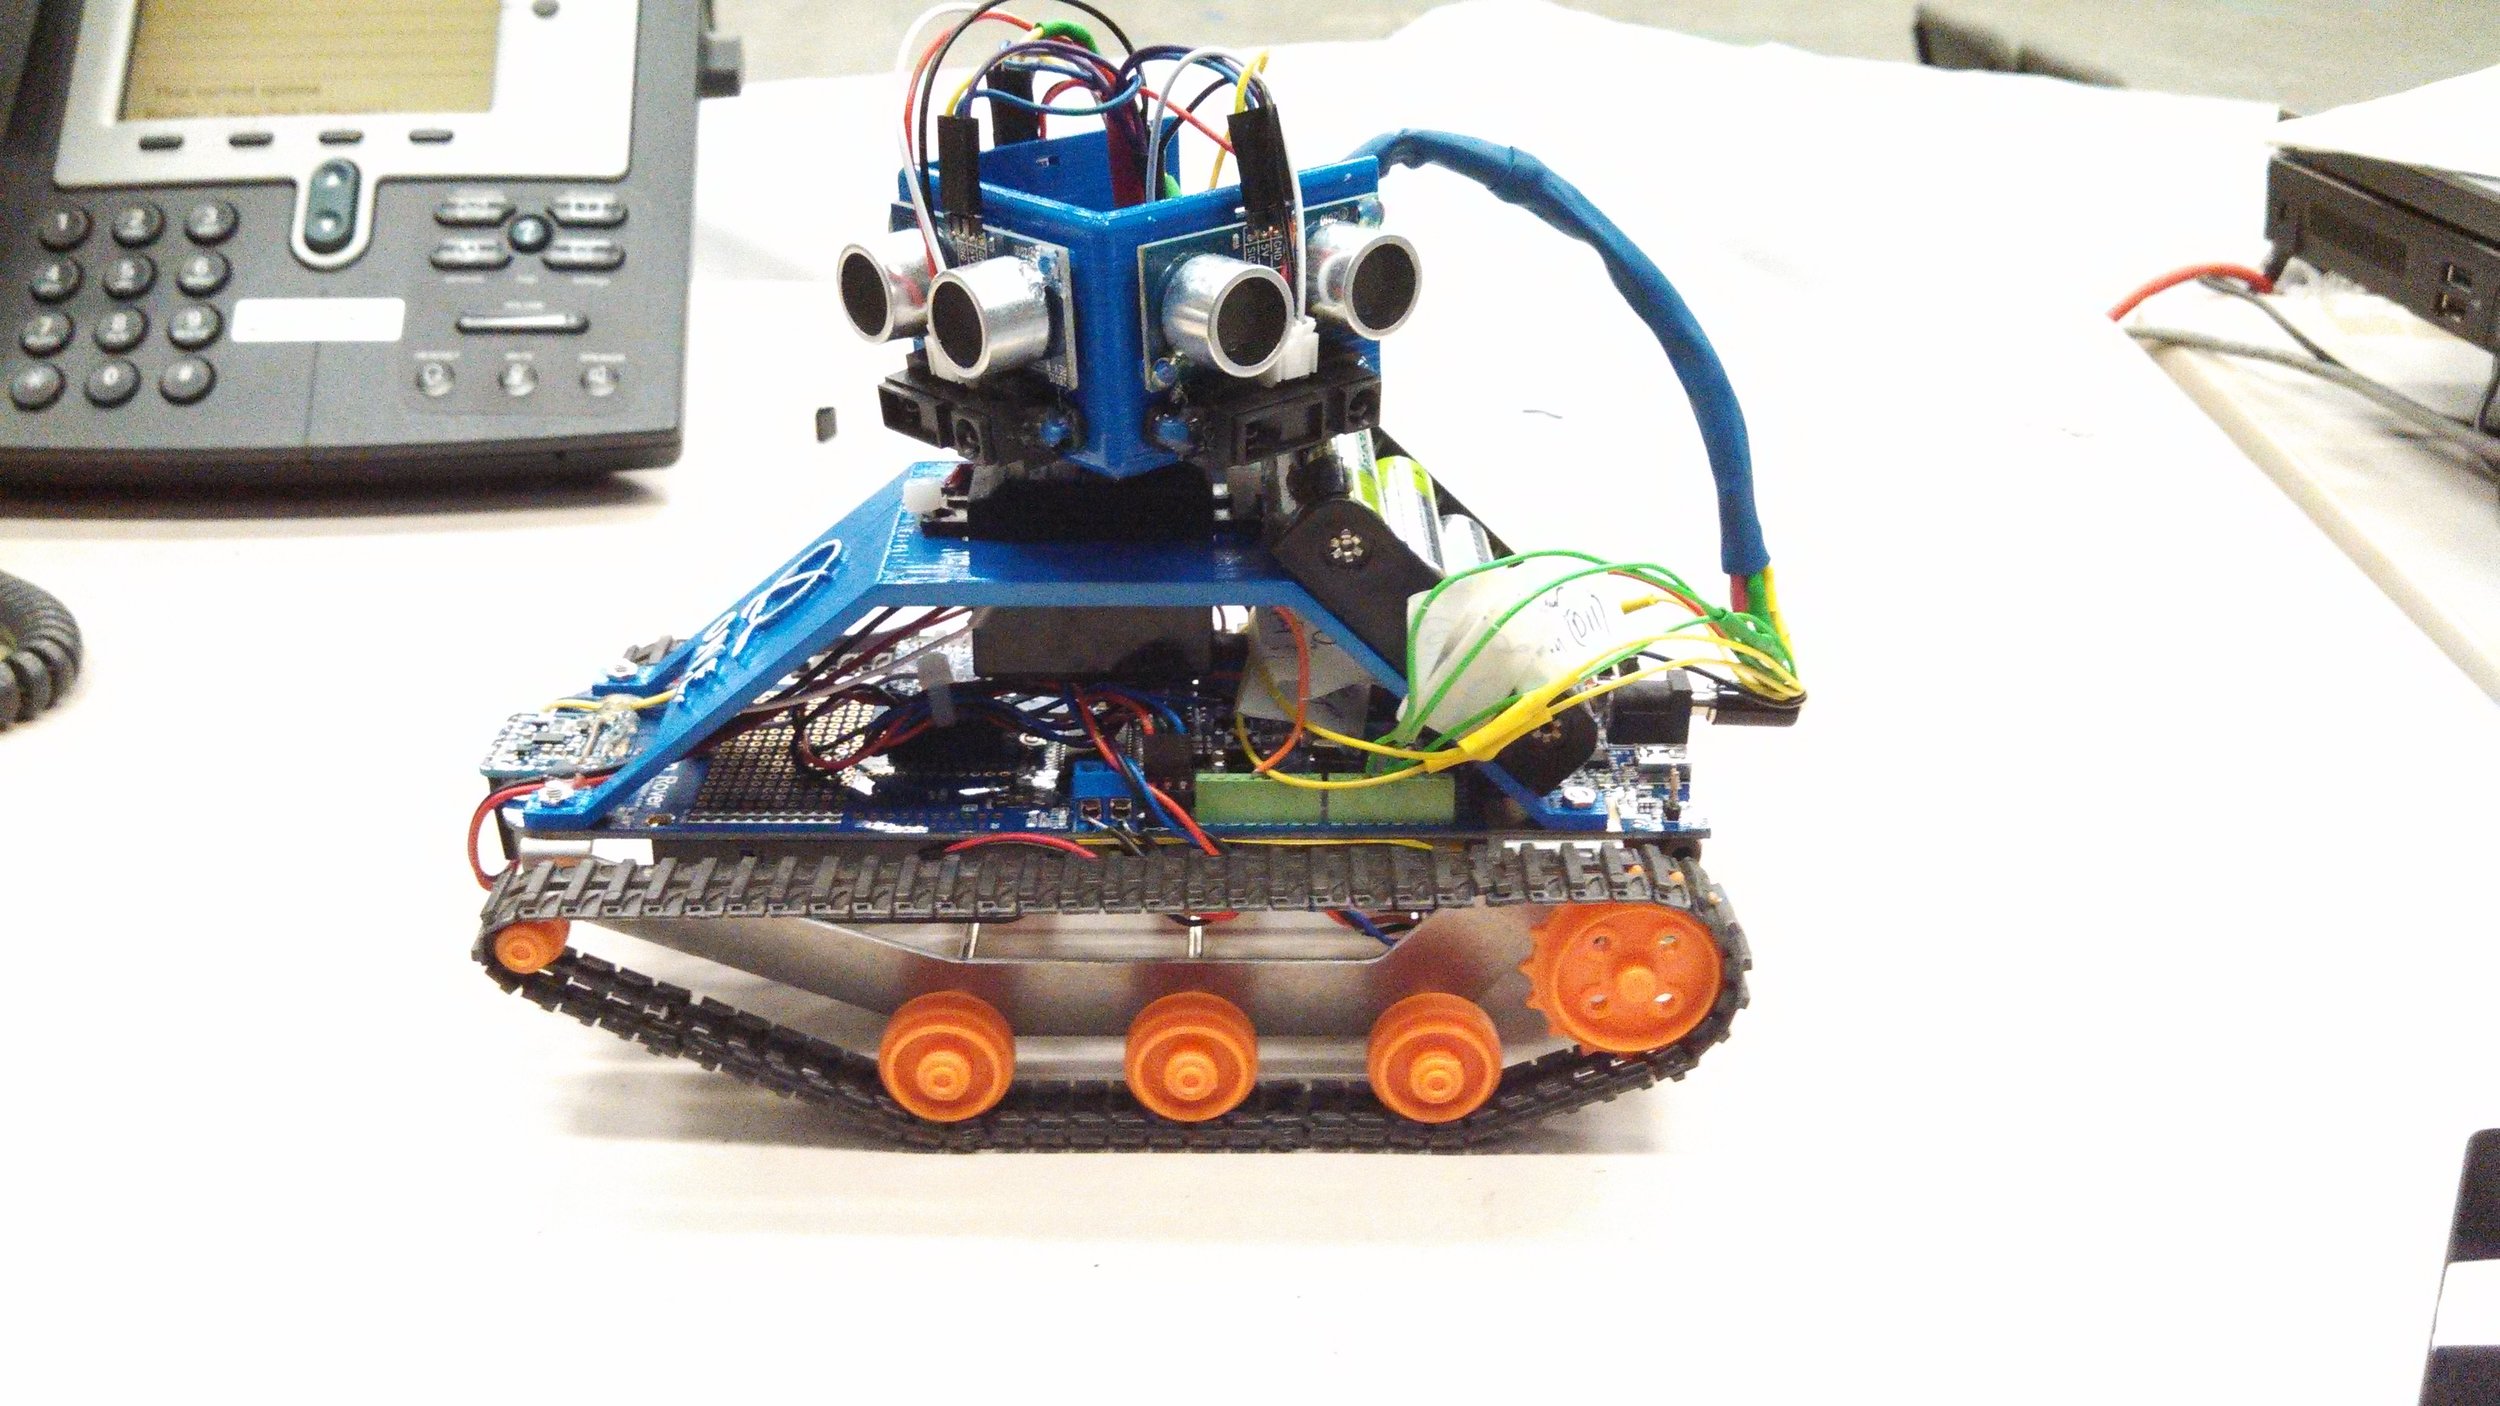  The finished CASM robot.&nbsp; 